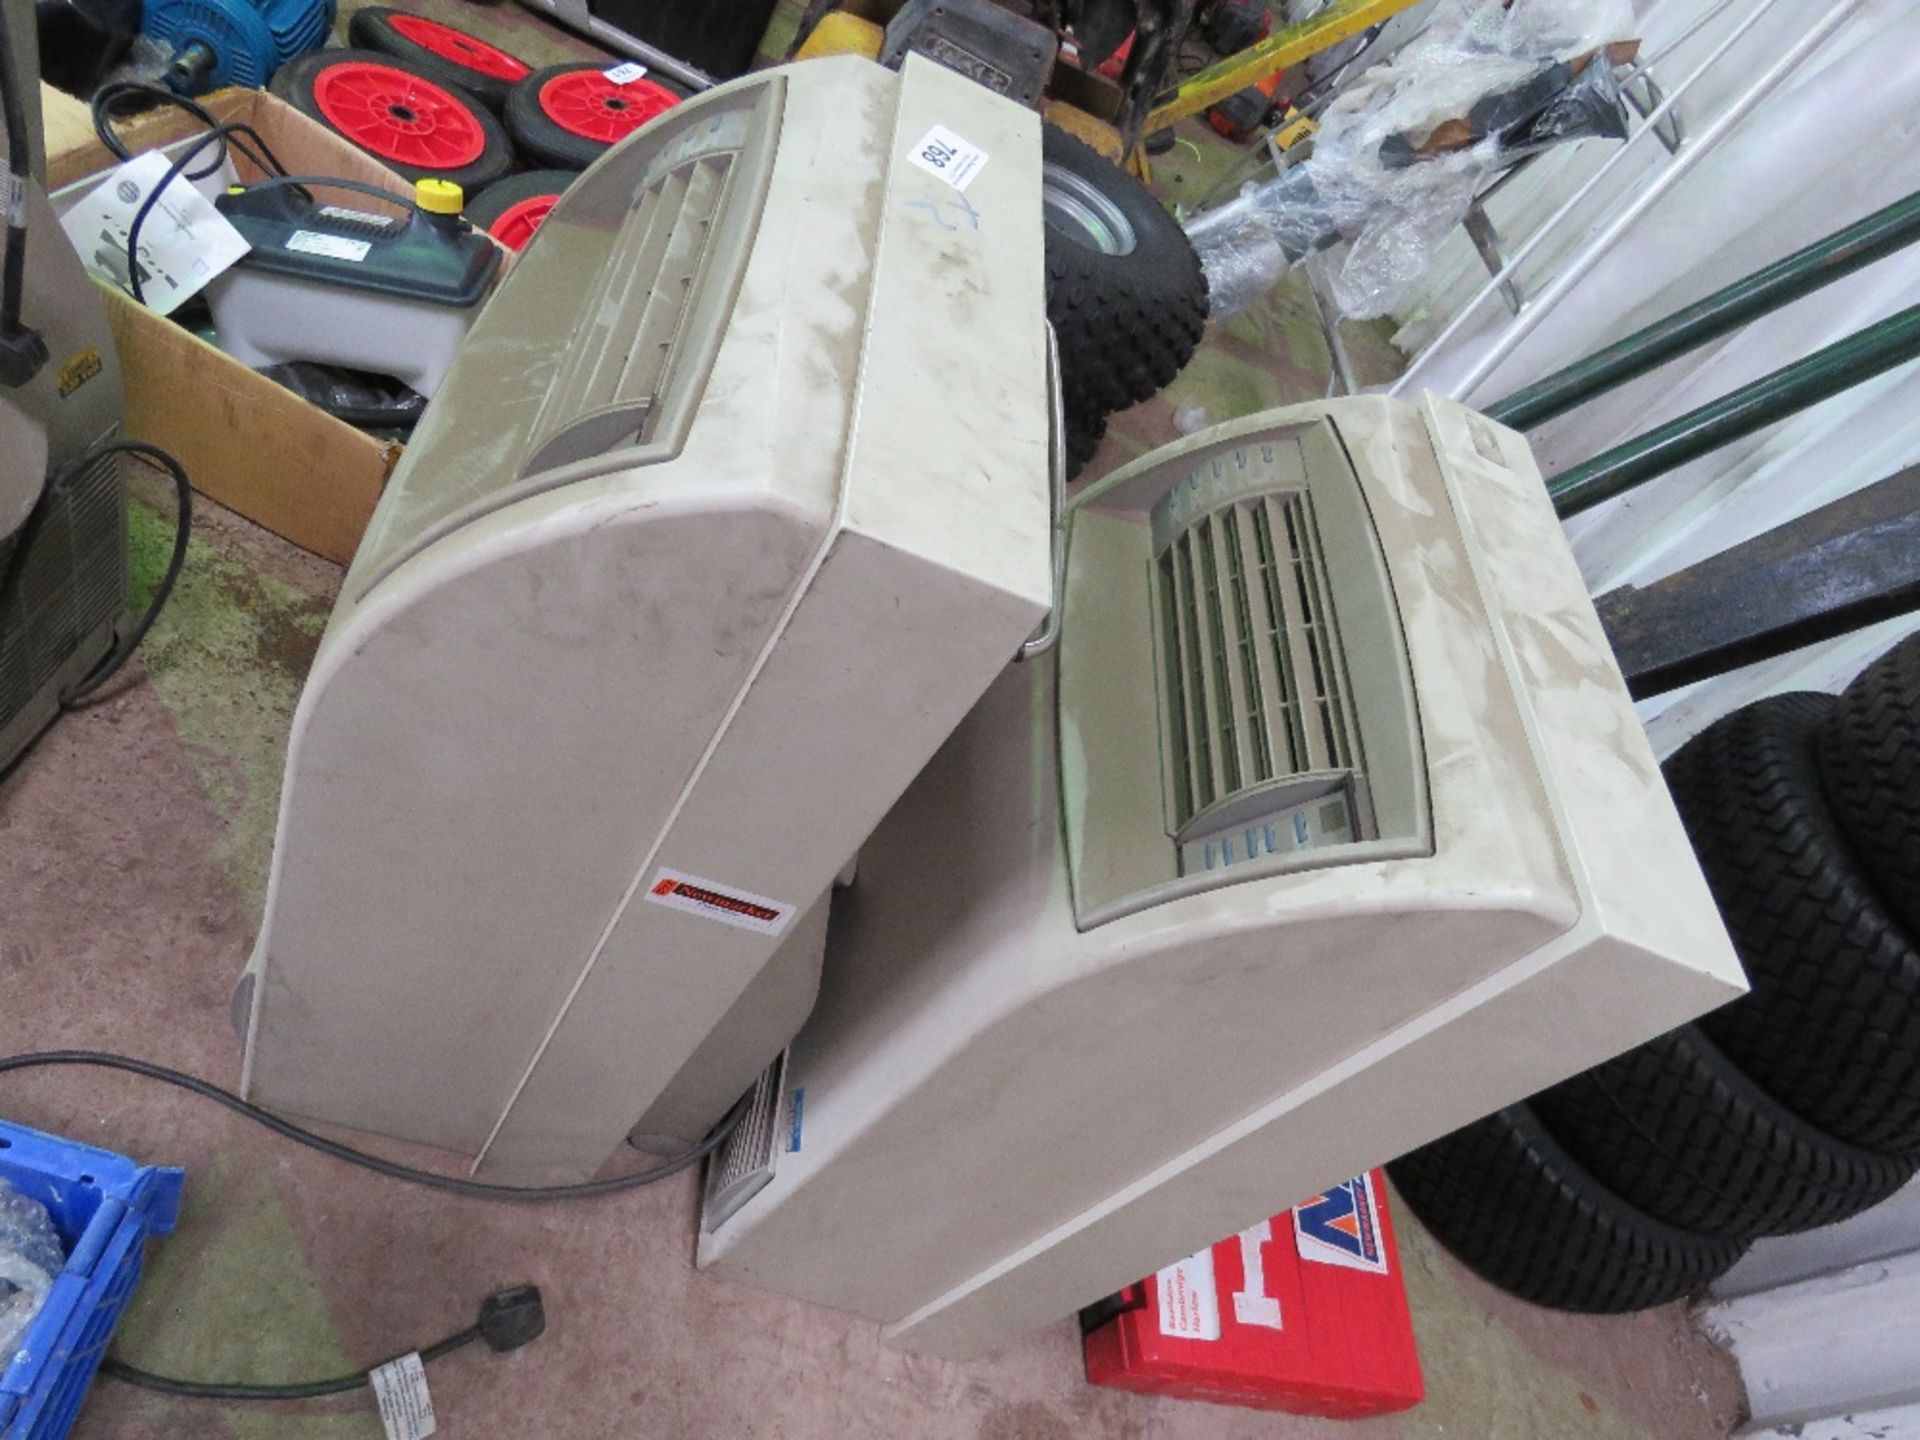 2 X HEAVY DUTY AIR CONDITIONERS, 240VOLT POWERED.